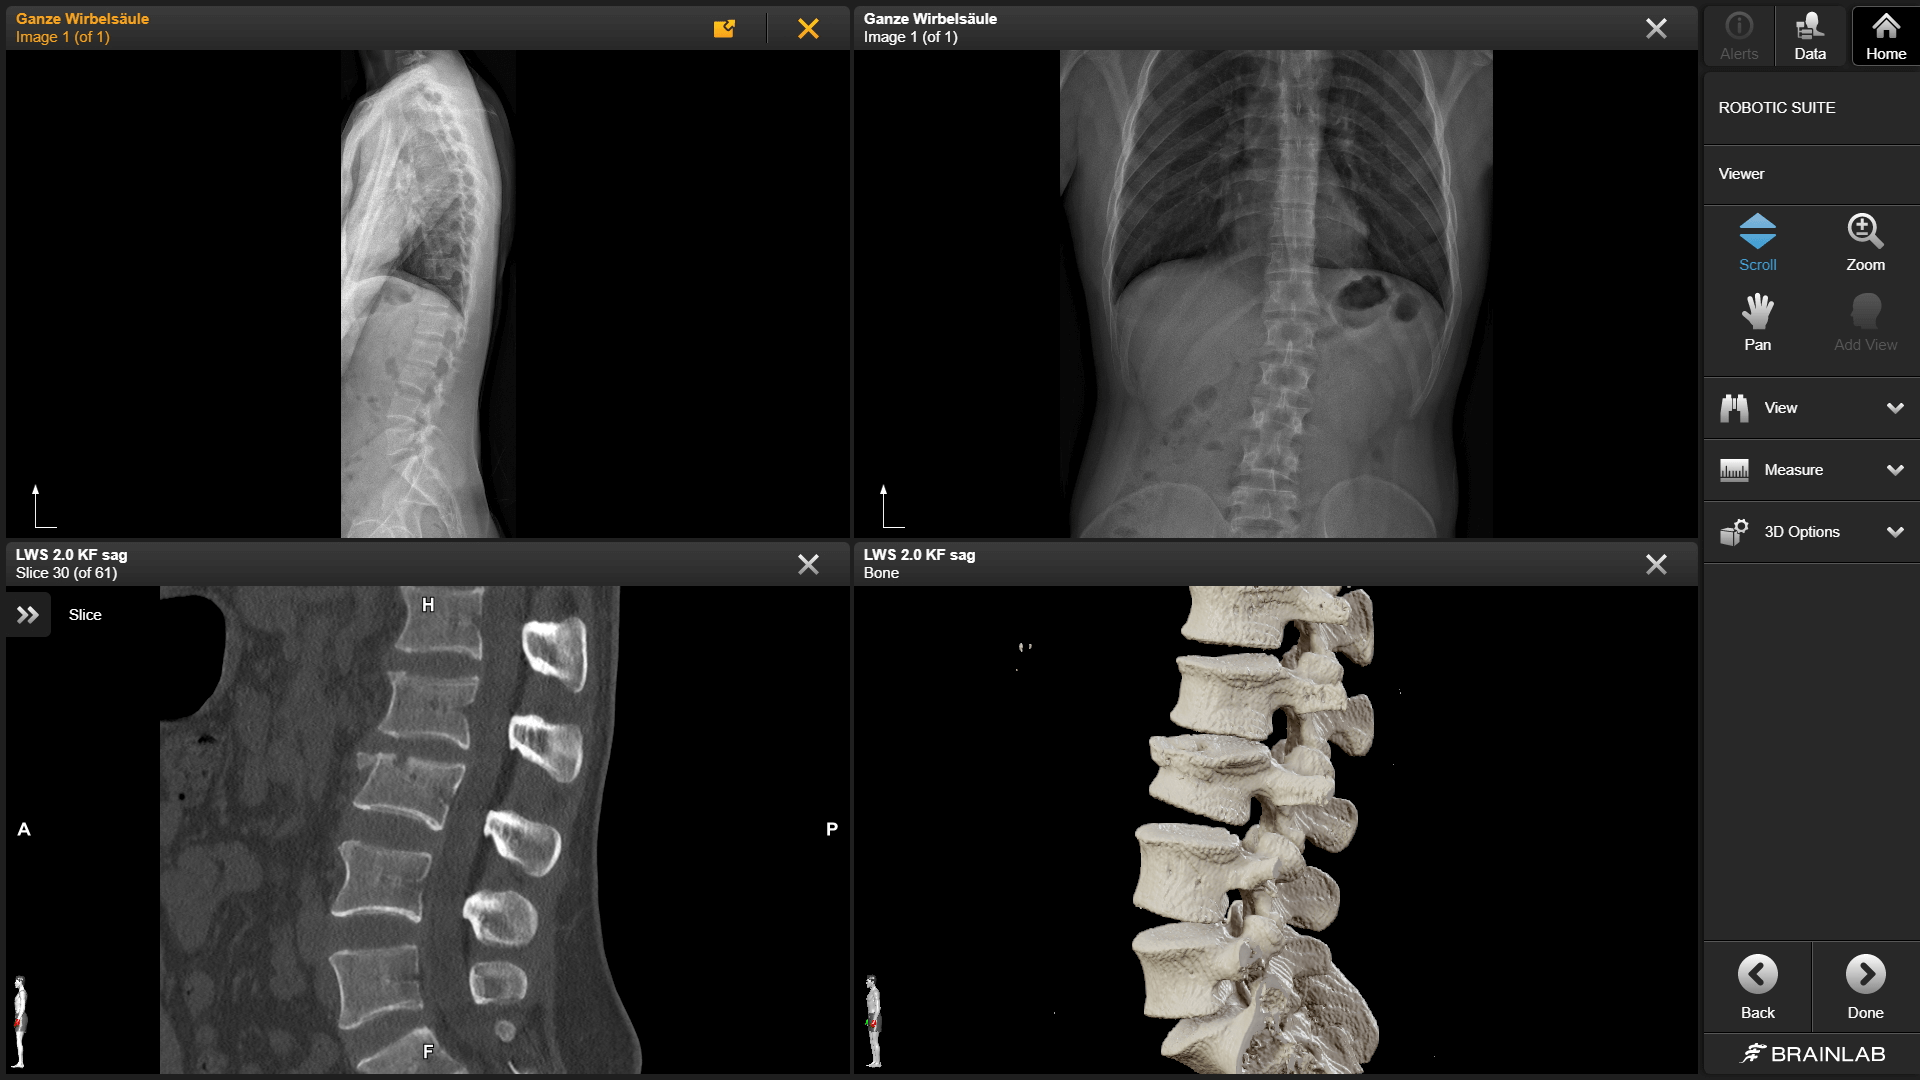 Screenshot: Interaction with DICOM images in the Elements Viewer application